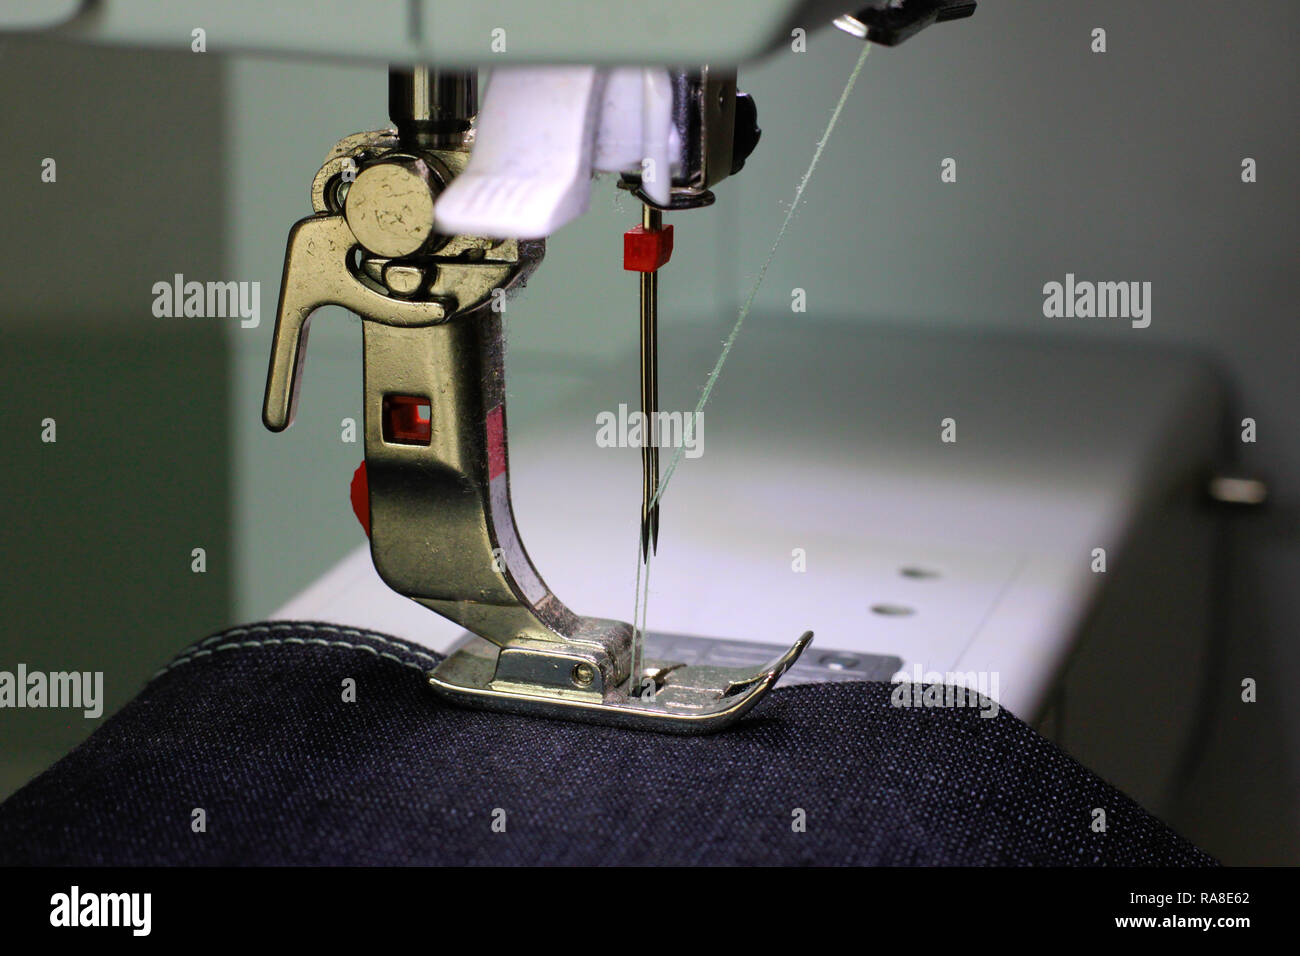 Black fabric under a pressing foot of a sewing machine with double needle. Light blue thread. Stock Photo